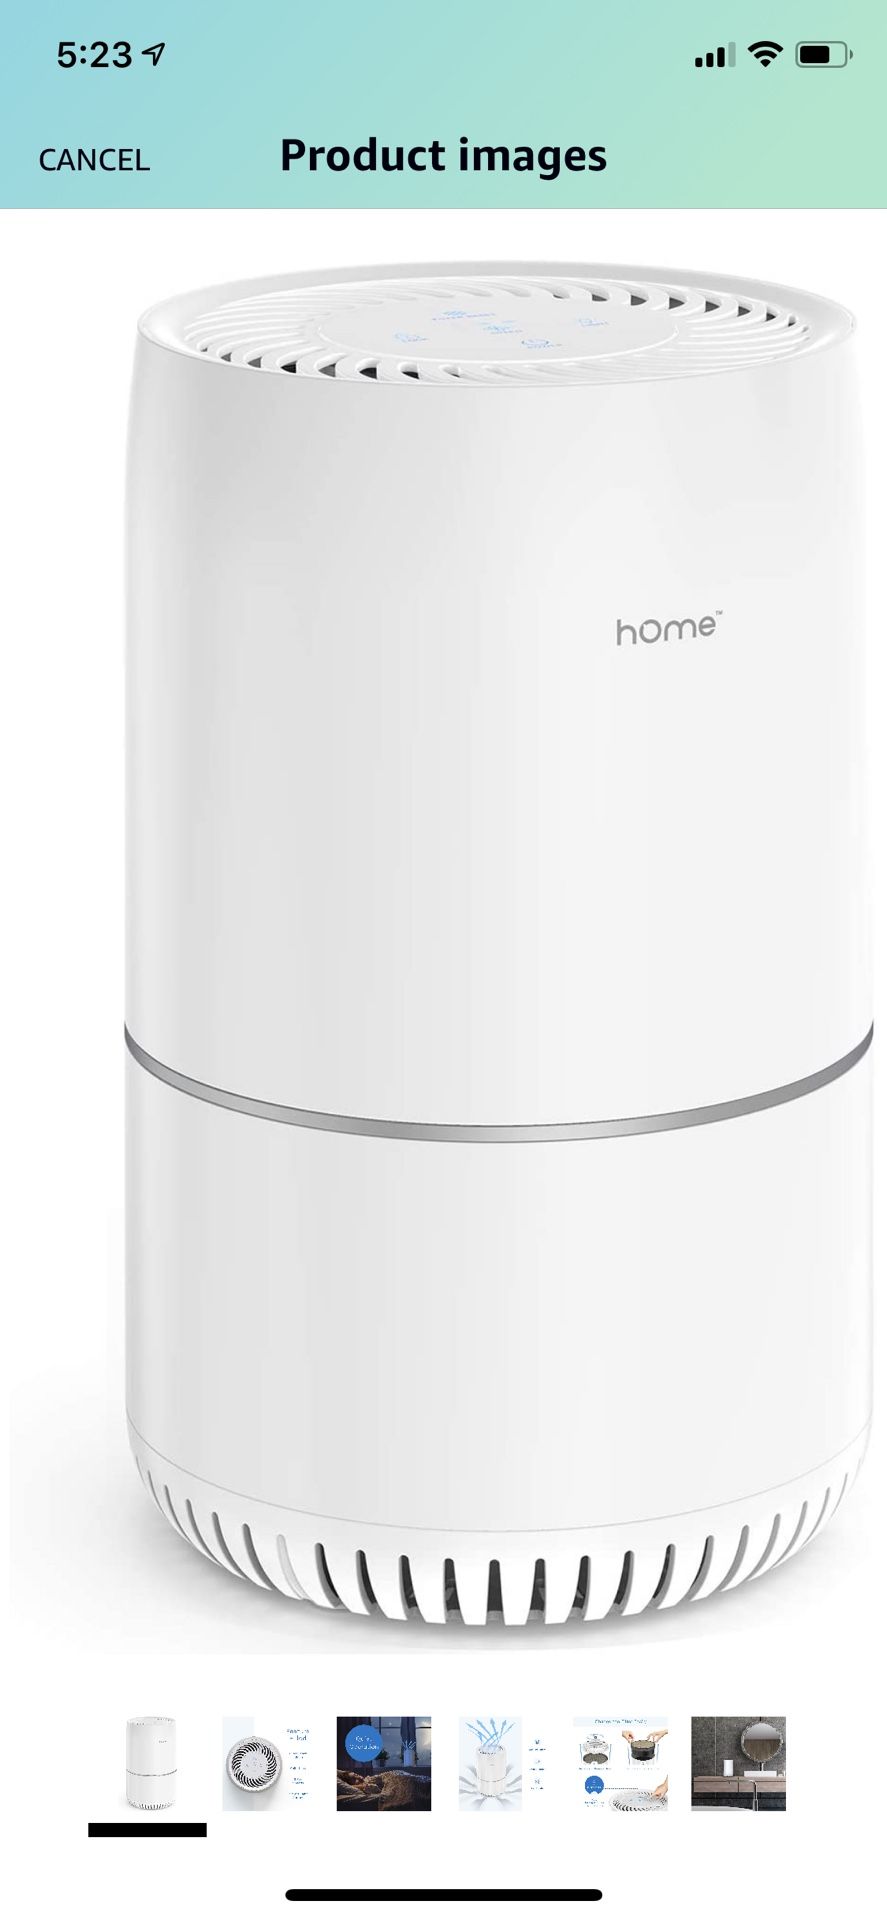 True HEPA H13 Filter Air Purifier for Home, Bedroom or Office - 3-Stage Filtration and Activated Carbon to Remove Small Particles and Reduce Smoke an